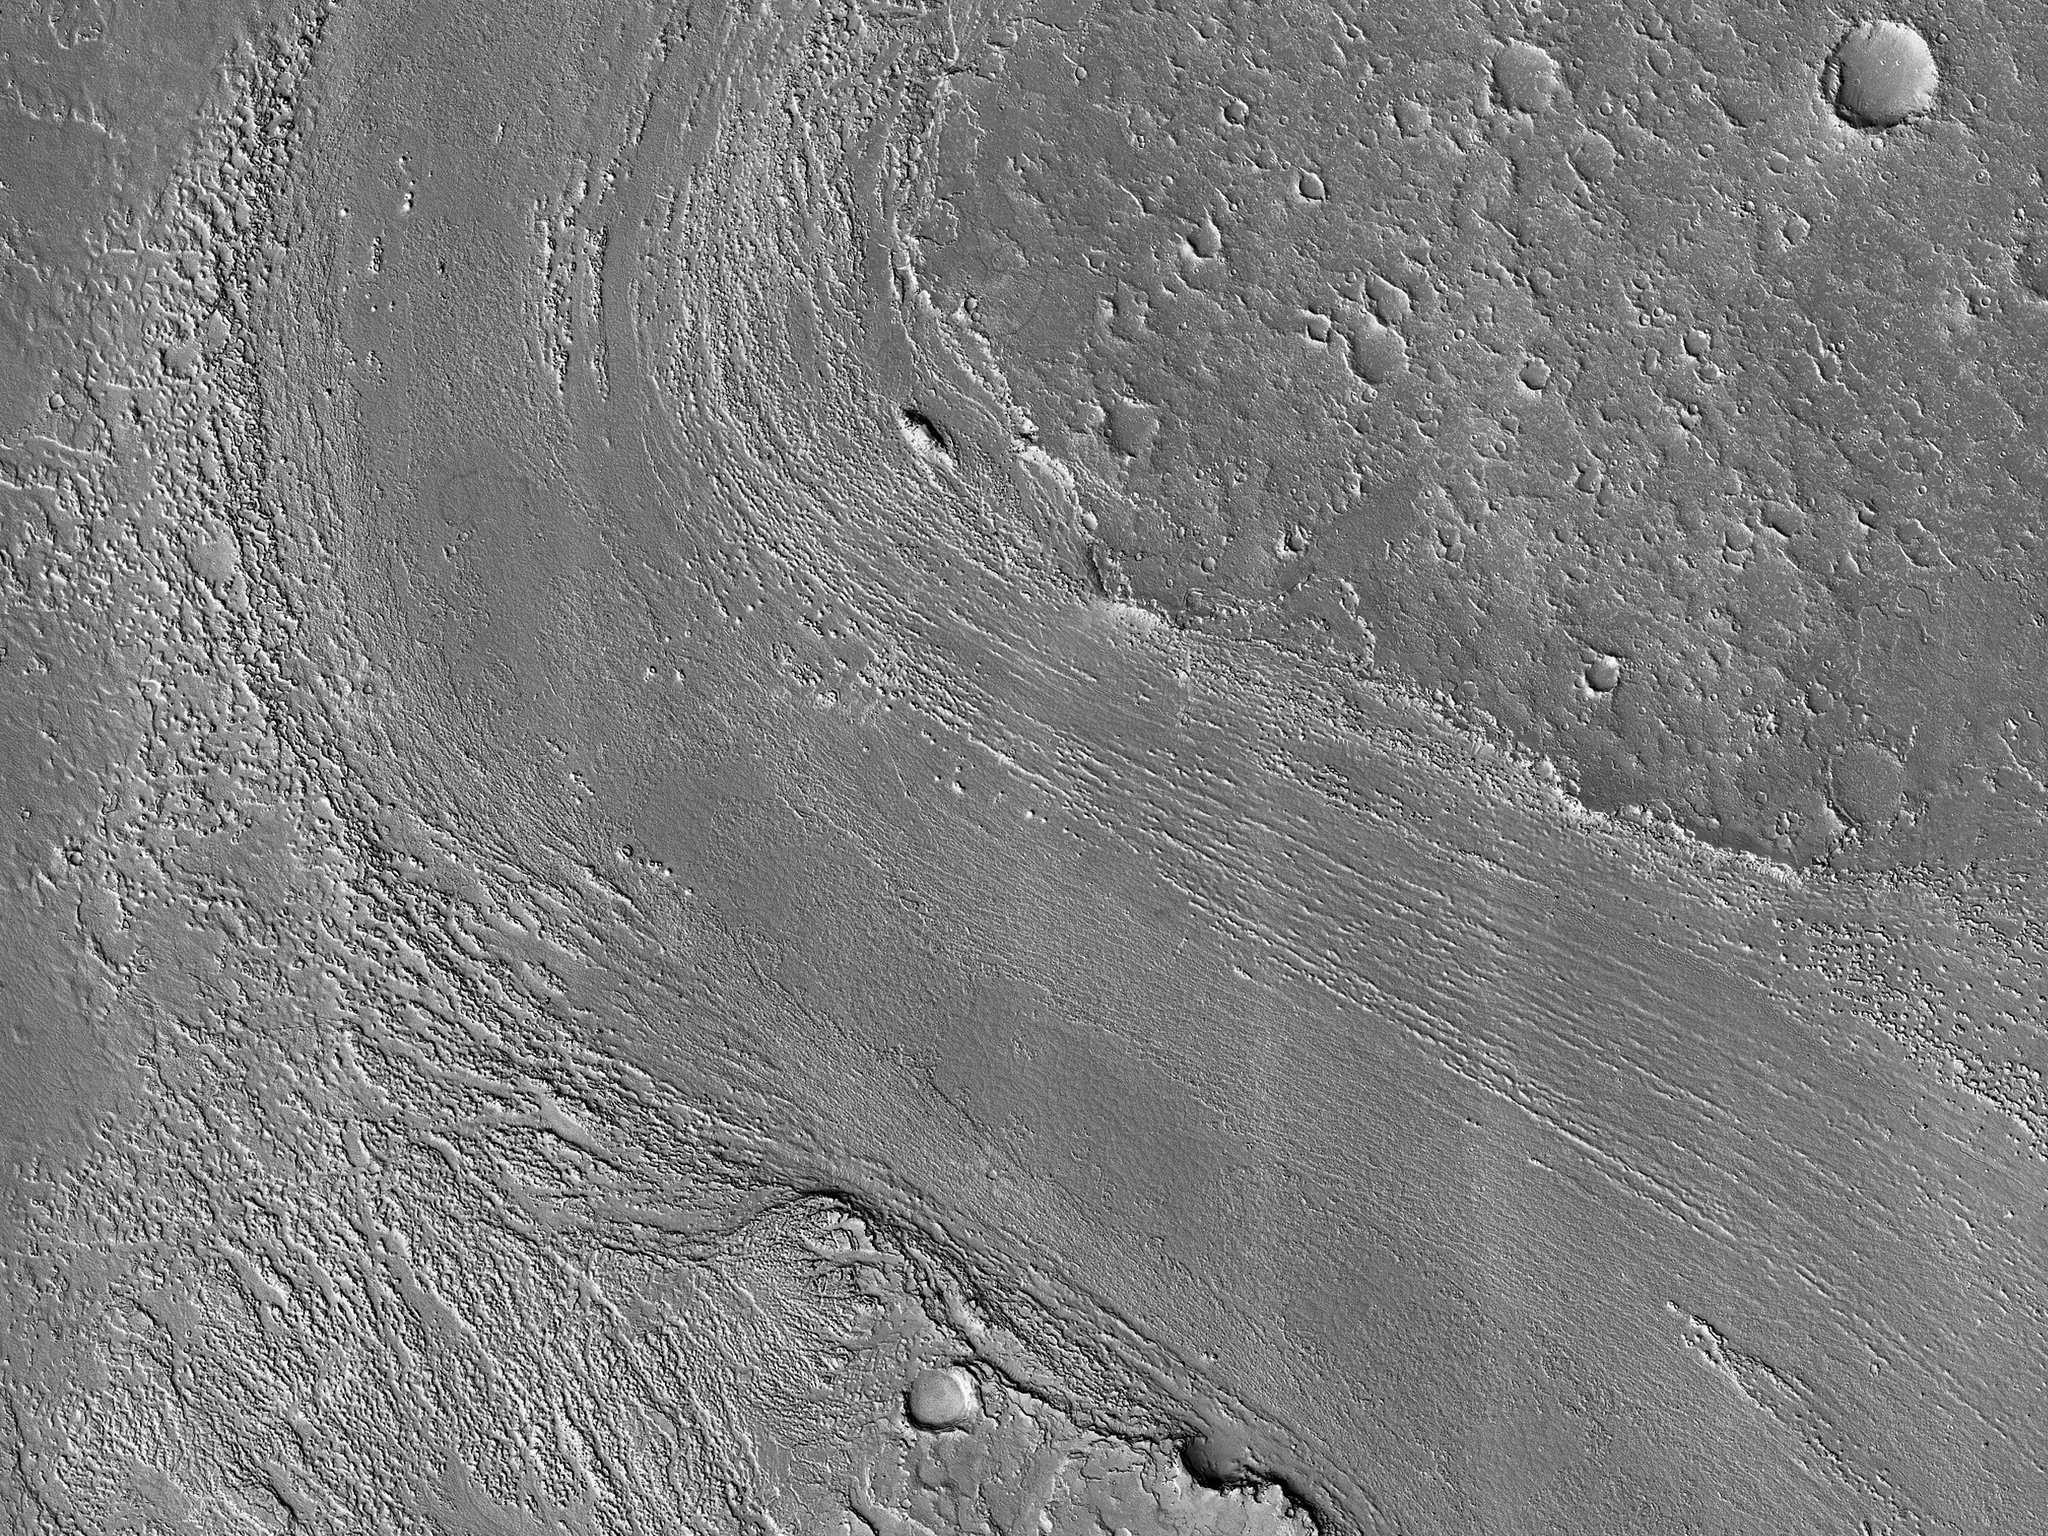 HiRISE image ESP_057978_1875 Athabasca Valles distributary showing lava flows originating from Elysium Mons to the northwest